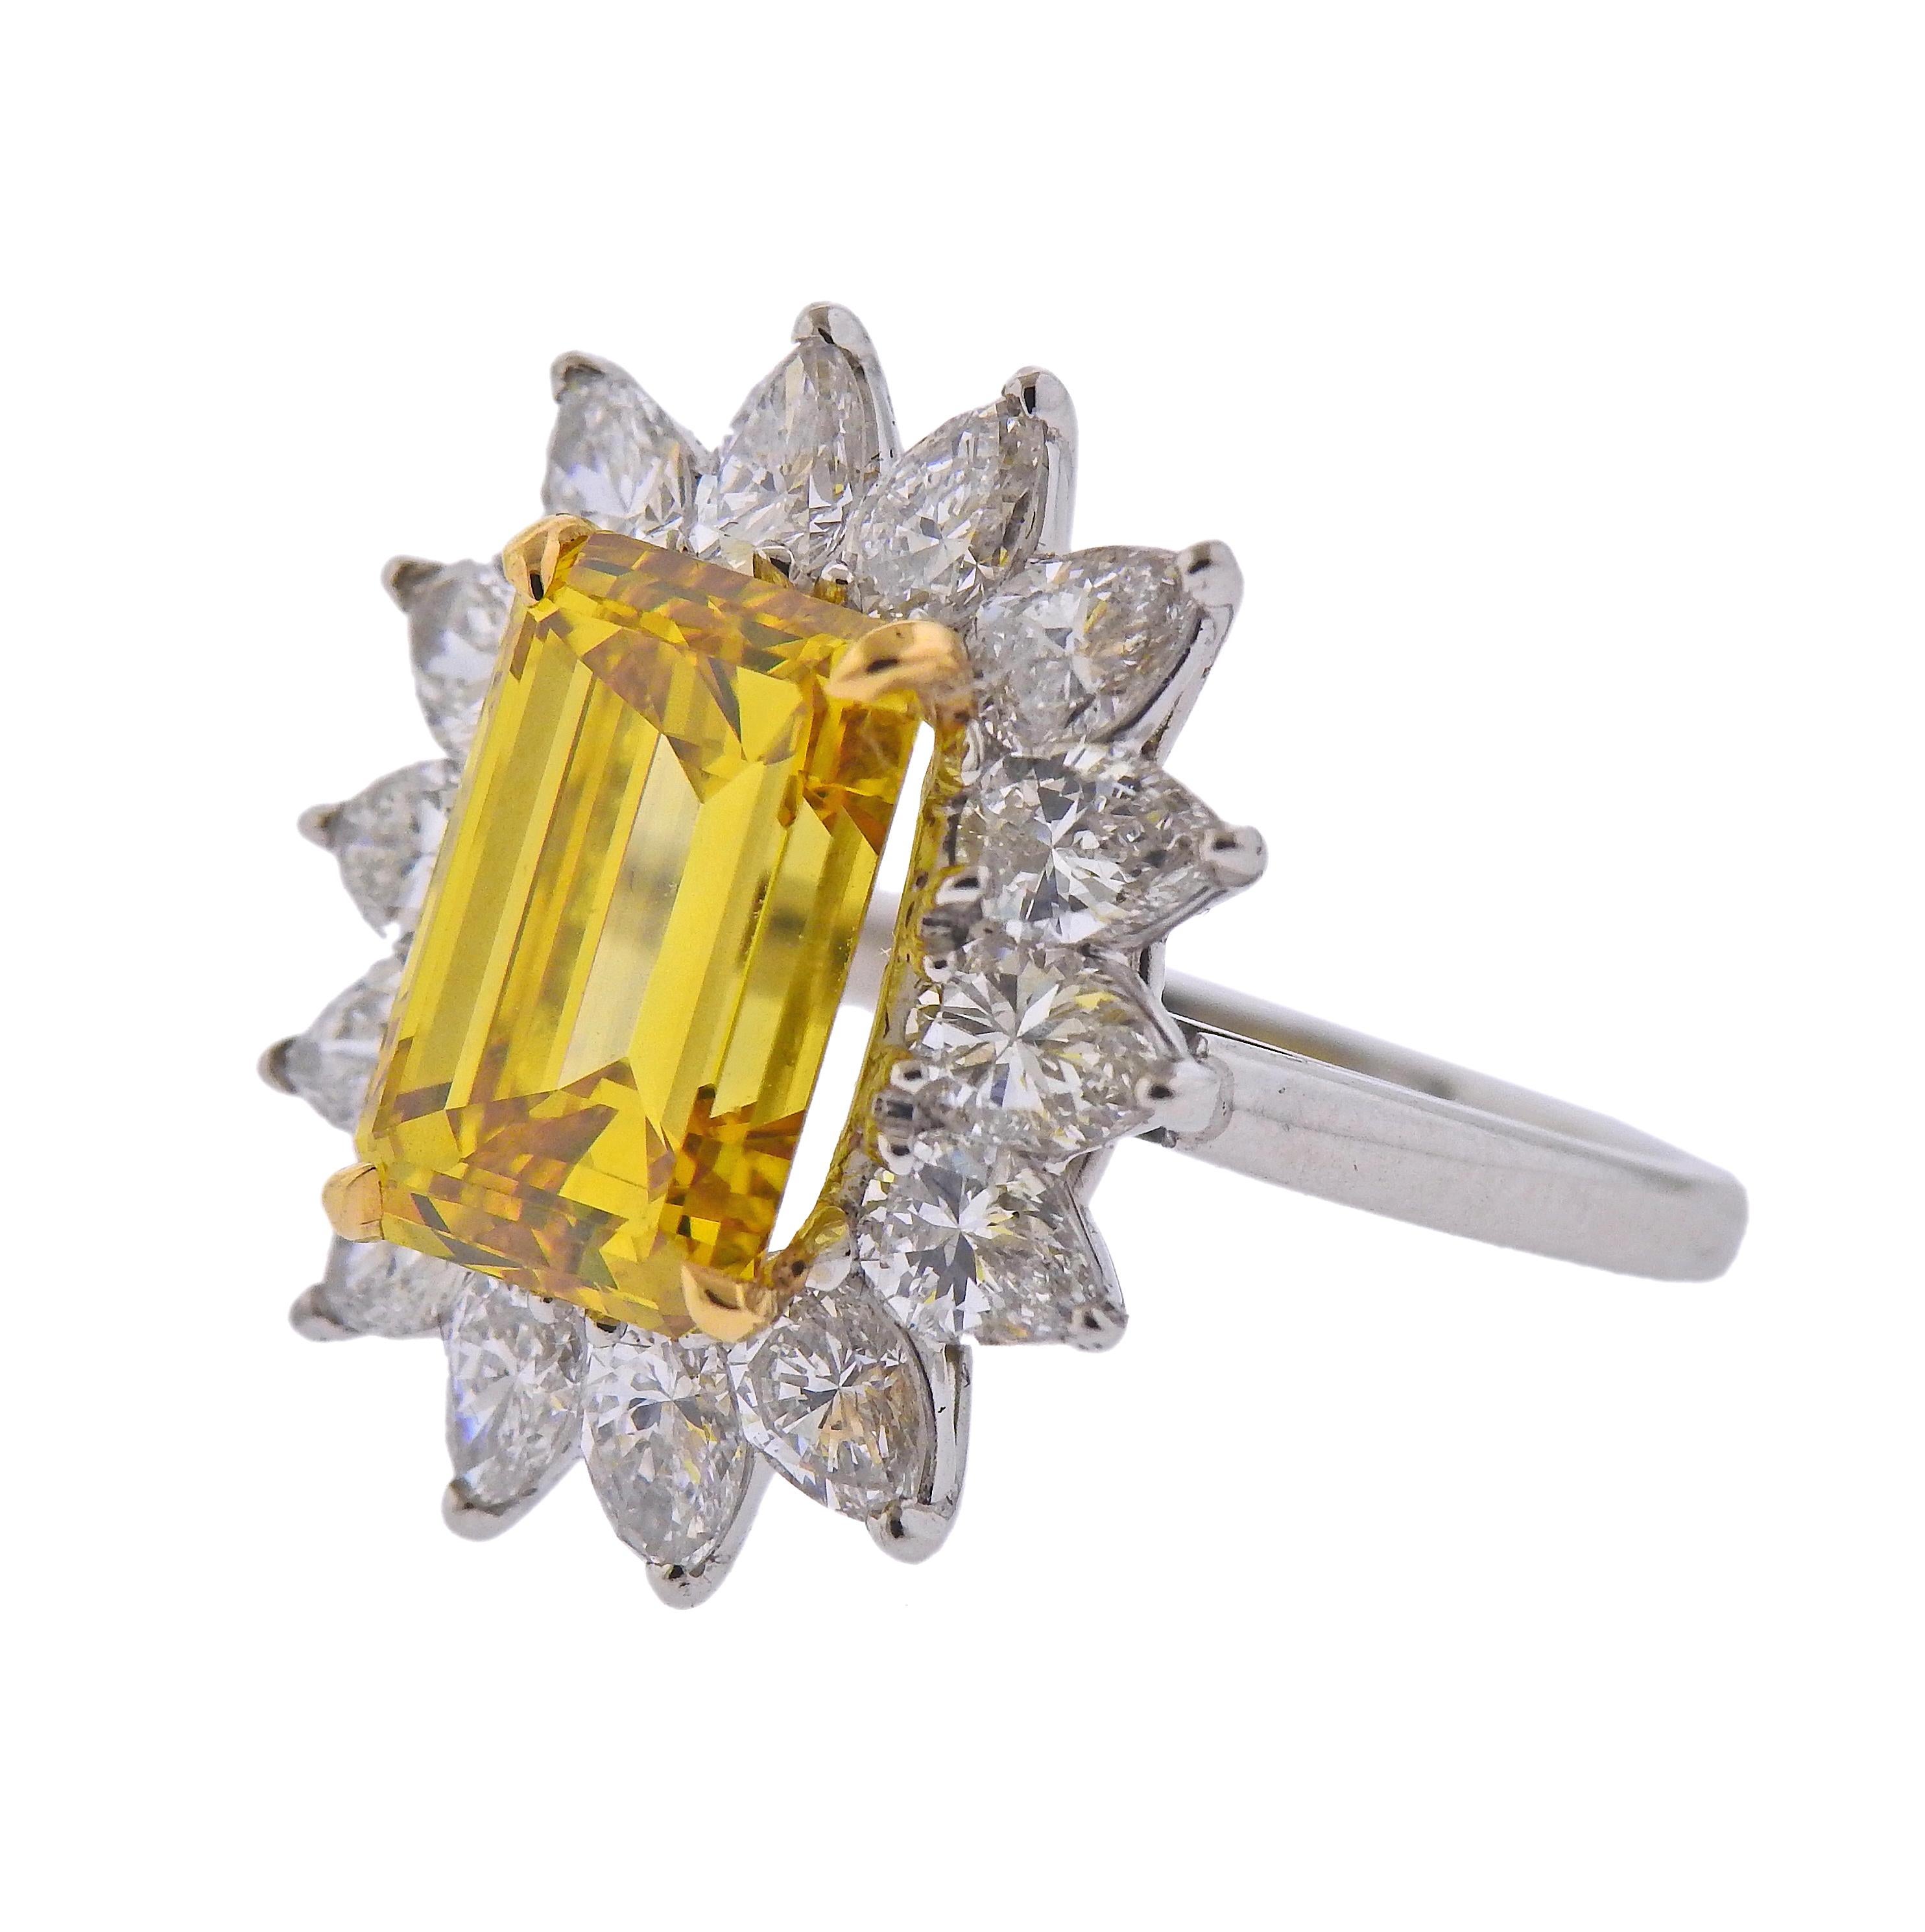 GIA certified center 5.23ct fancy vivid yellow/VS2 emerald cut diamond, set in platinum, surrounded with approx. 2.80ctw in pear cut diamonds. Ring size 7.25. Ring top id 22mm x 18mm. Weight - 8.1 grams. 